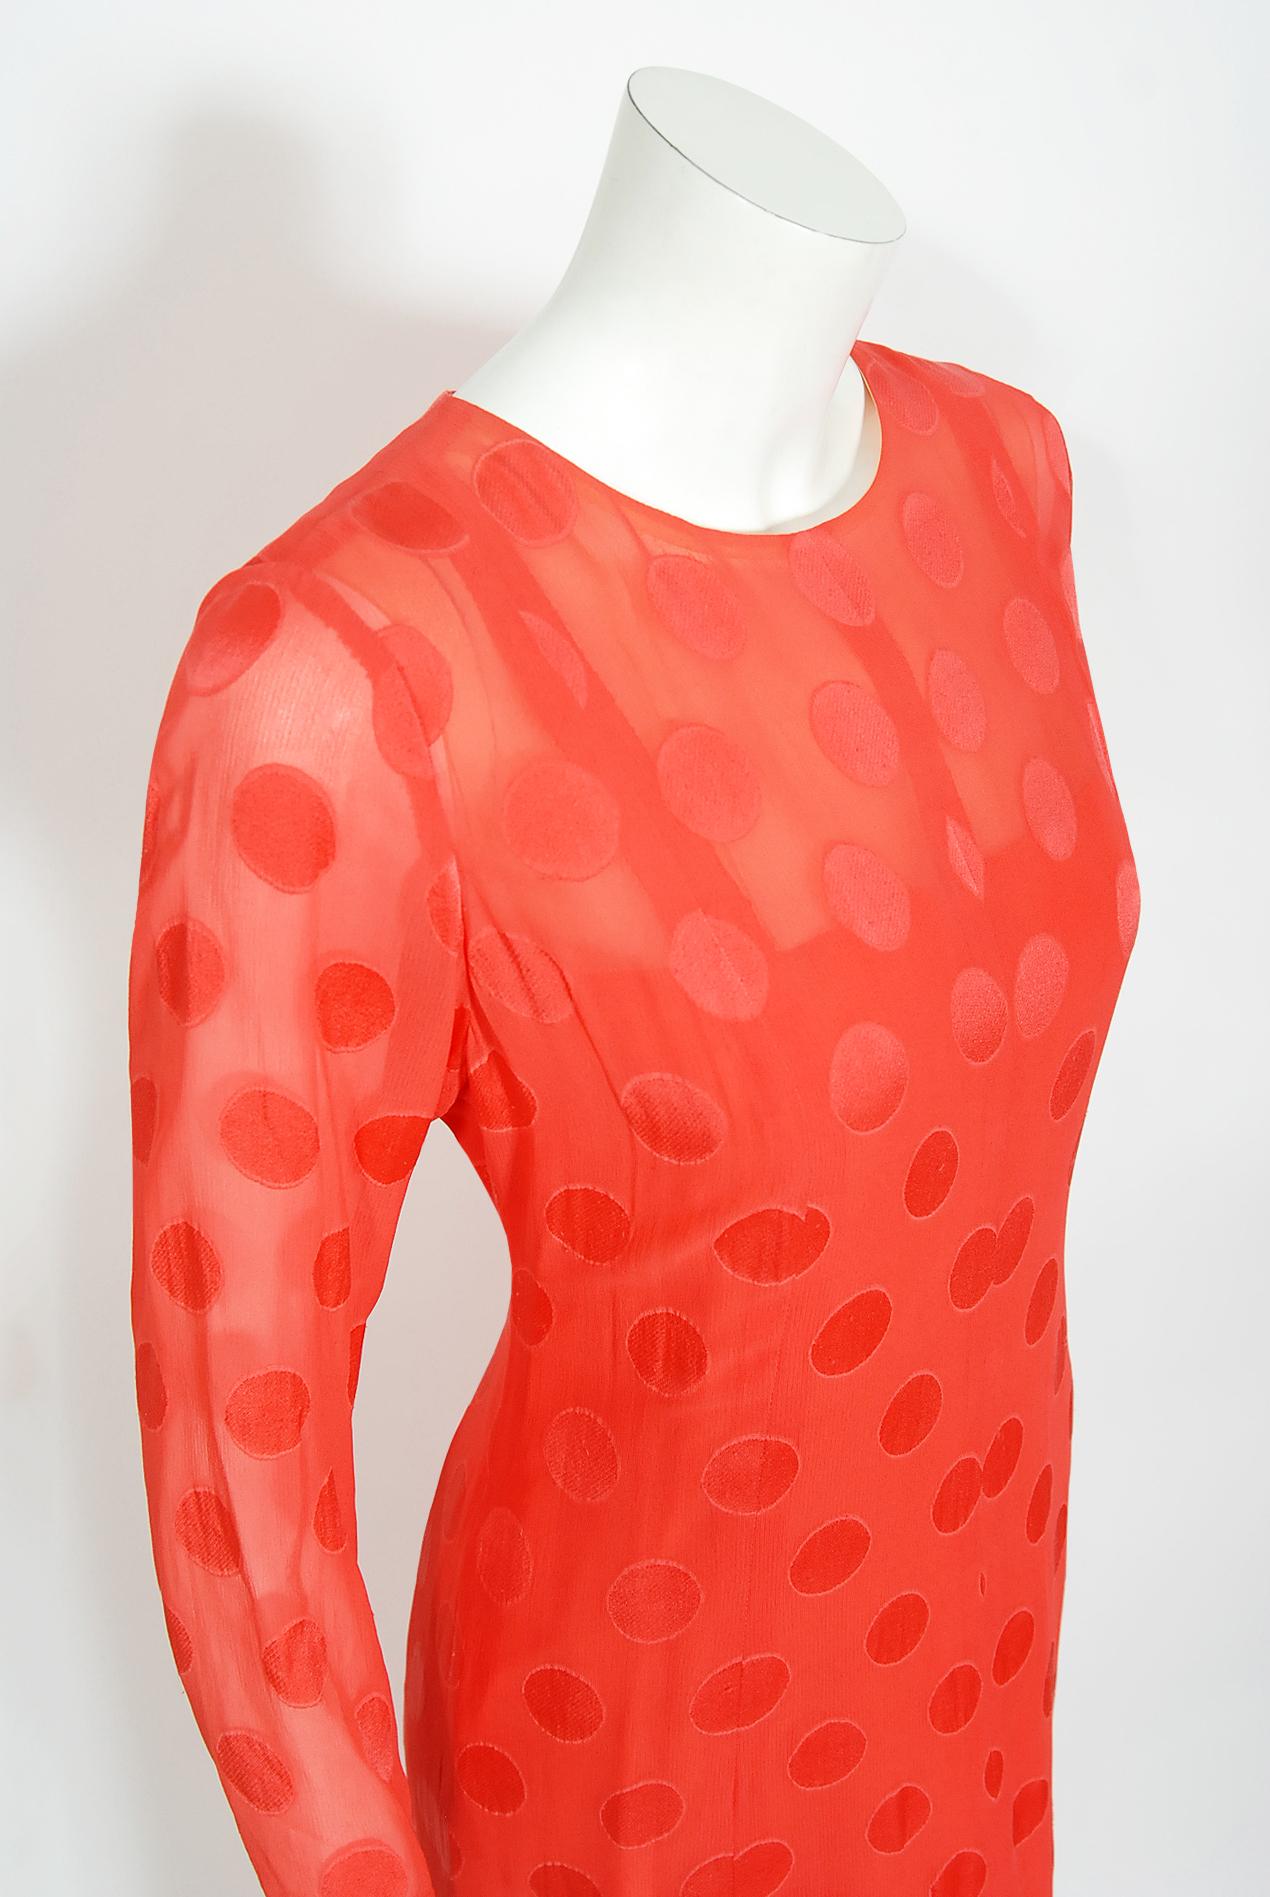 Vintage 1973 Givenchy Haute Couture Orange Dotted Silk Carwash-Hem Caftan Gown For Sale 7